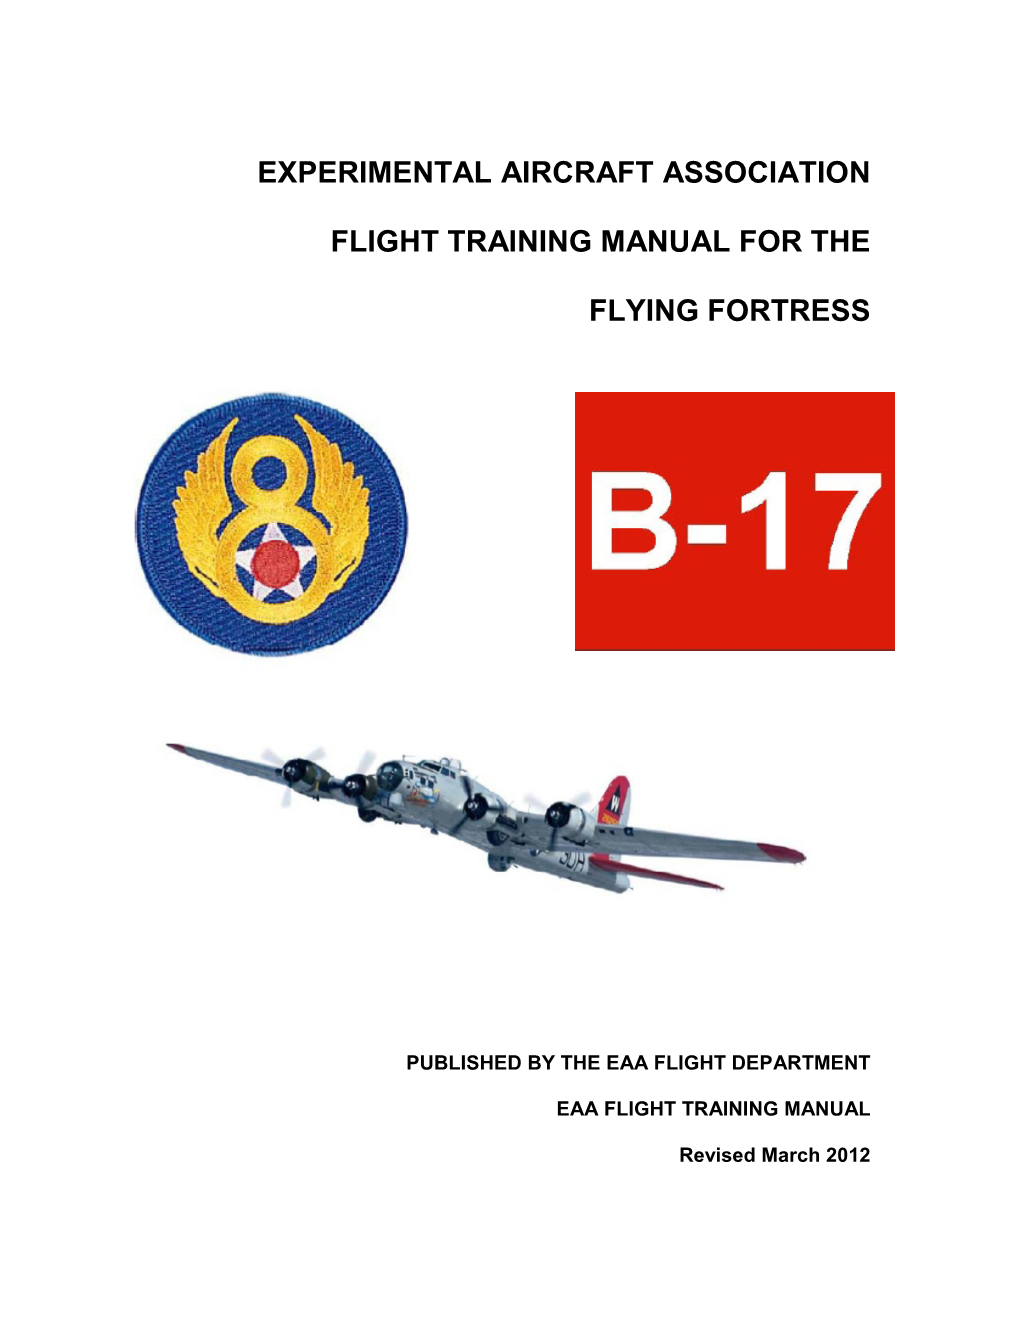 Experimental Aircraft Association Flight Training Manual for the Flying